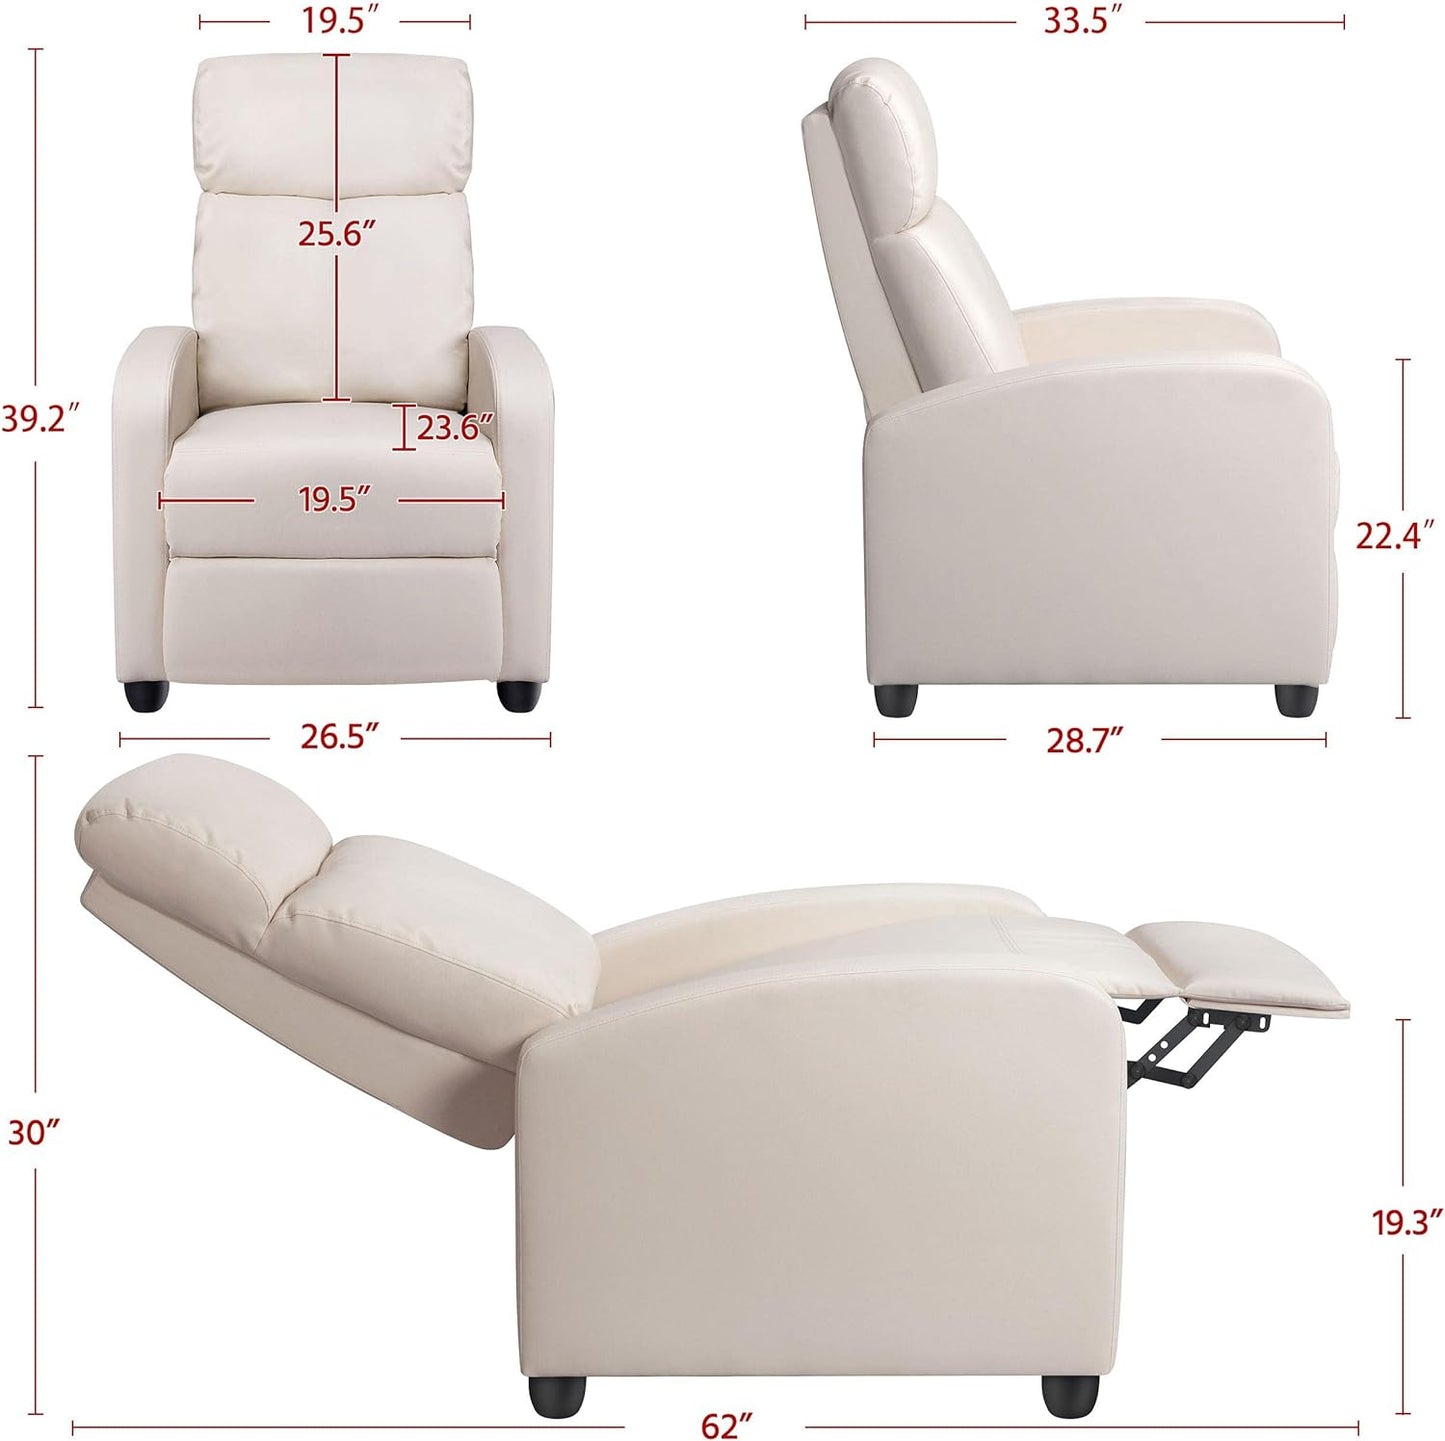 Recliner Chair PU Leather Recliner Sofa Home Theater Seating Adjustable Modern Single Reclining Chair Sofa with Pocket Spring Living Room Bedroom Beige